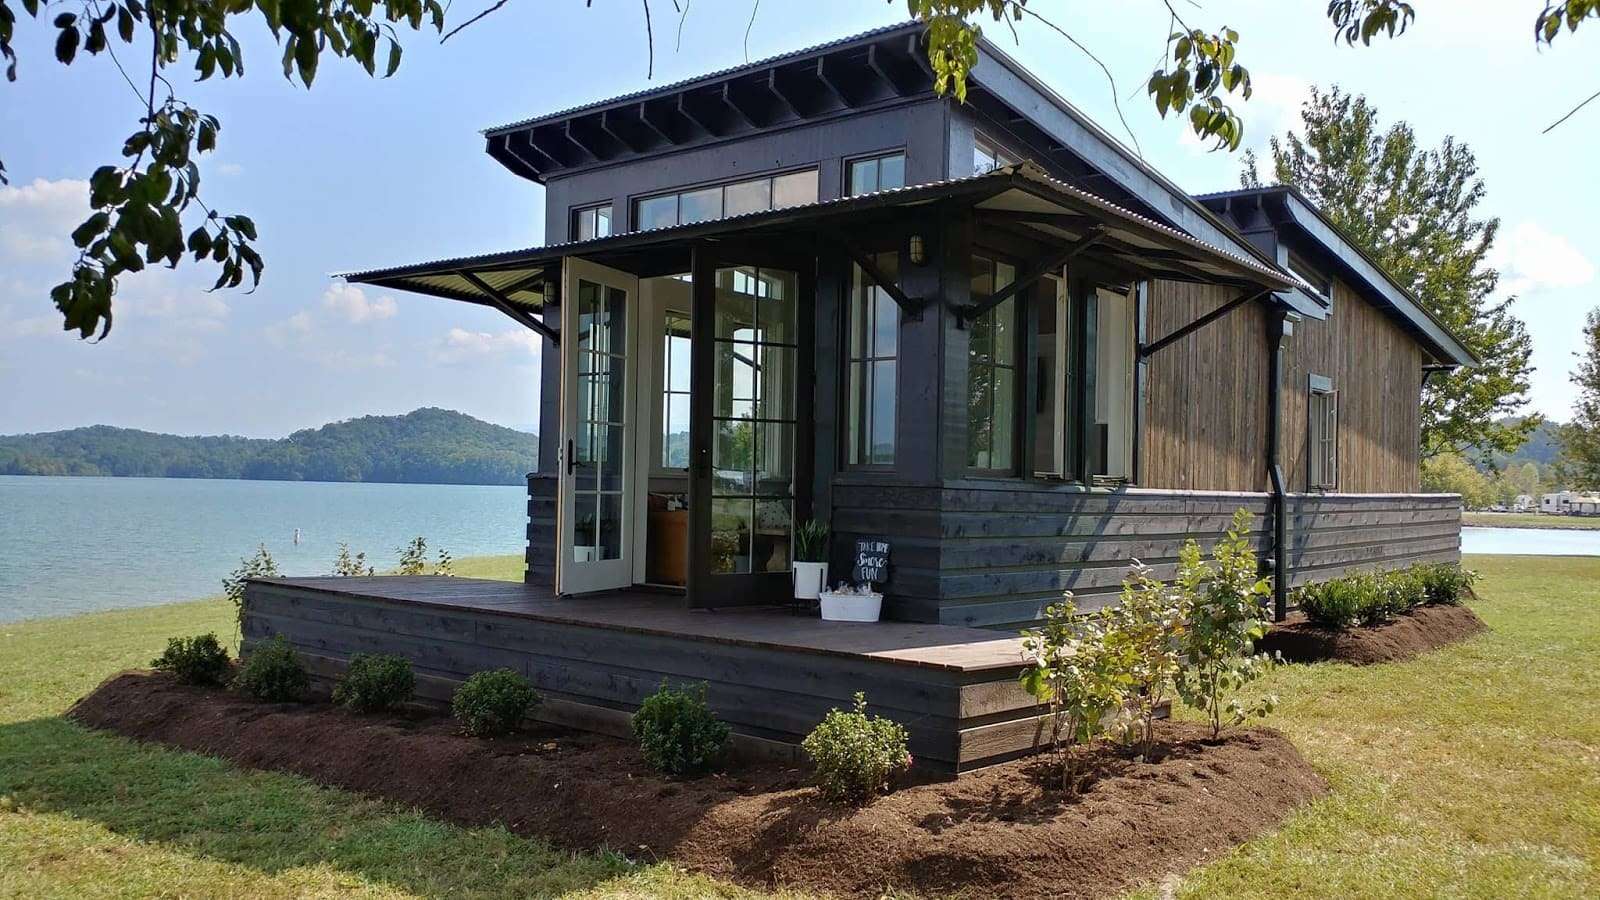 The Saltbox Tiny Home by Designer Cottages